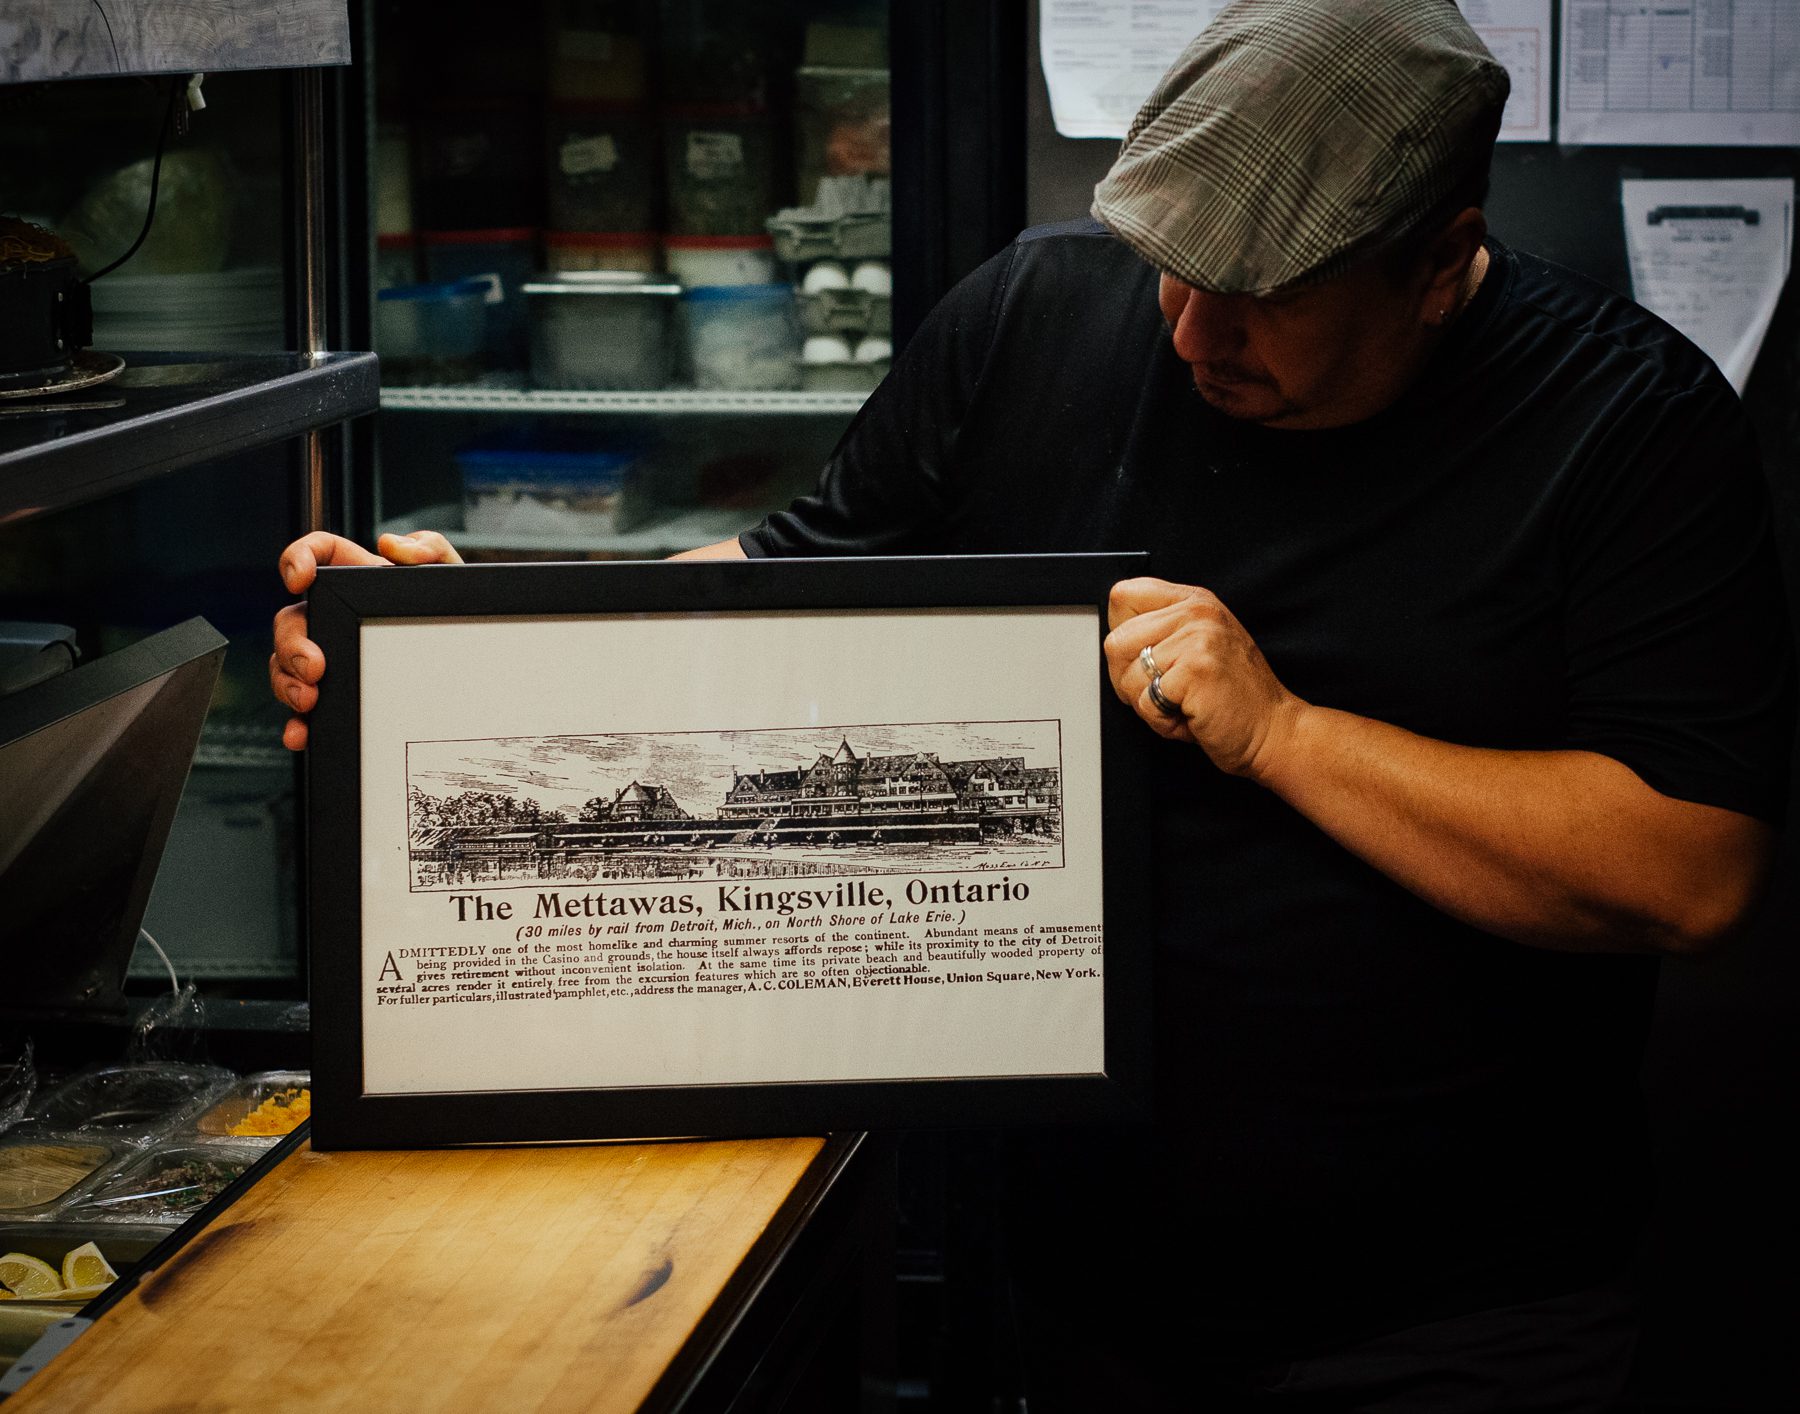 Anthony shows an old advertisement for The Mettawas Resort.